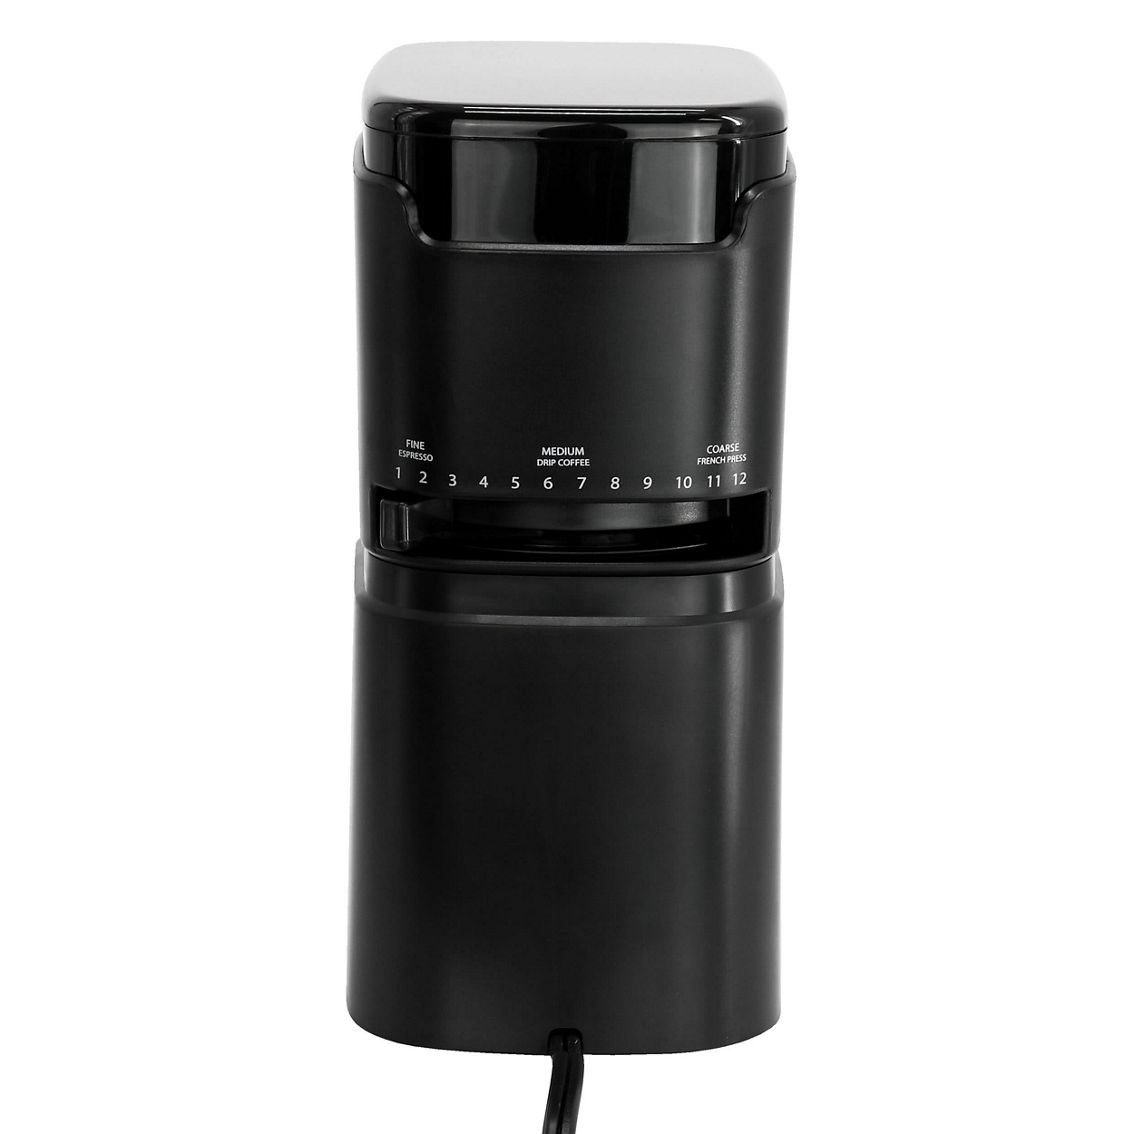 Mr. Coffee 12 Cup Automatic Burr Coffee Grinder - Image 3 of 5